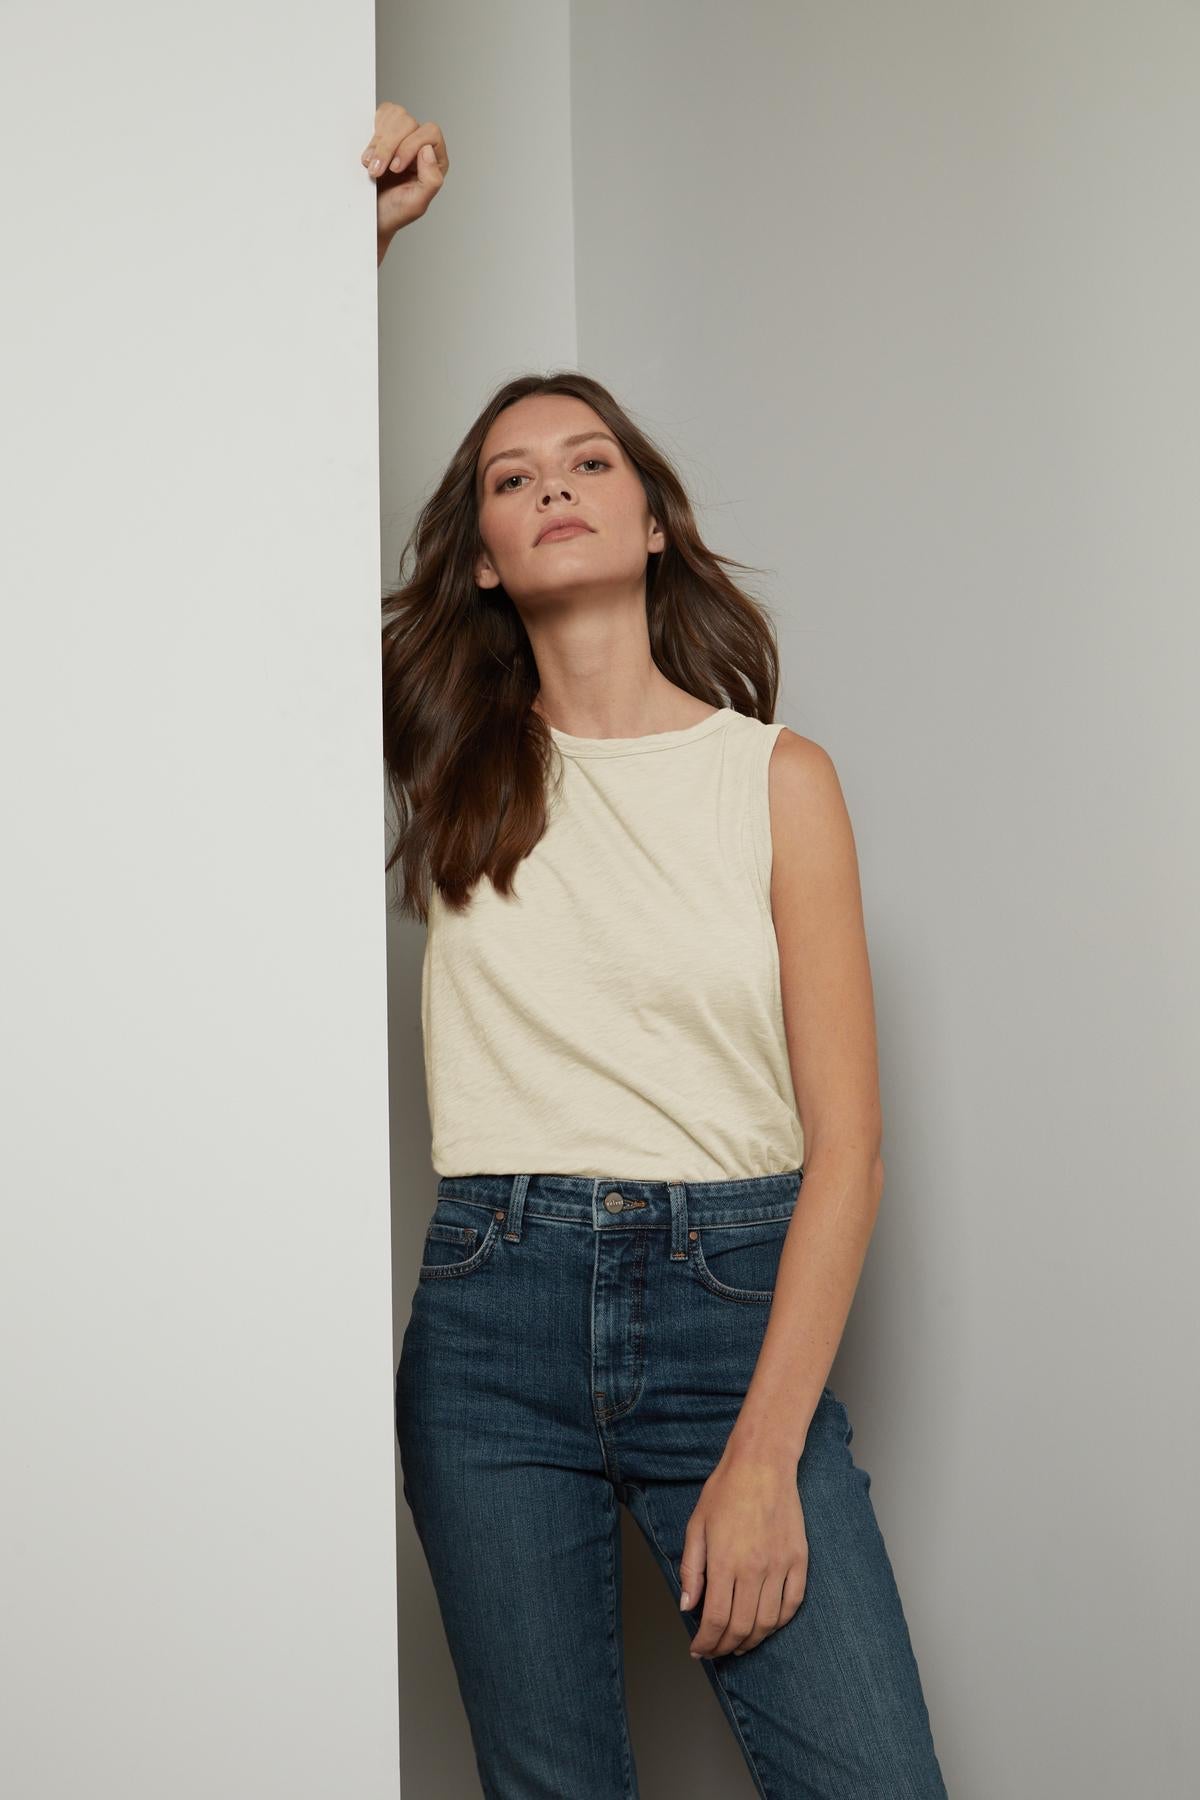 A woman in jeans and a Velvet by Graham & Spencer TAURUS COTTON SLUB TANK leaning against a wall.-35567717679297